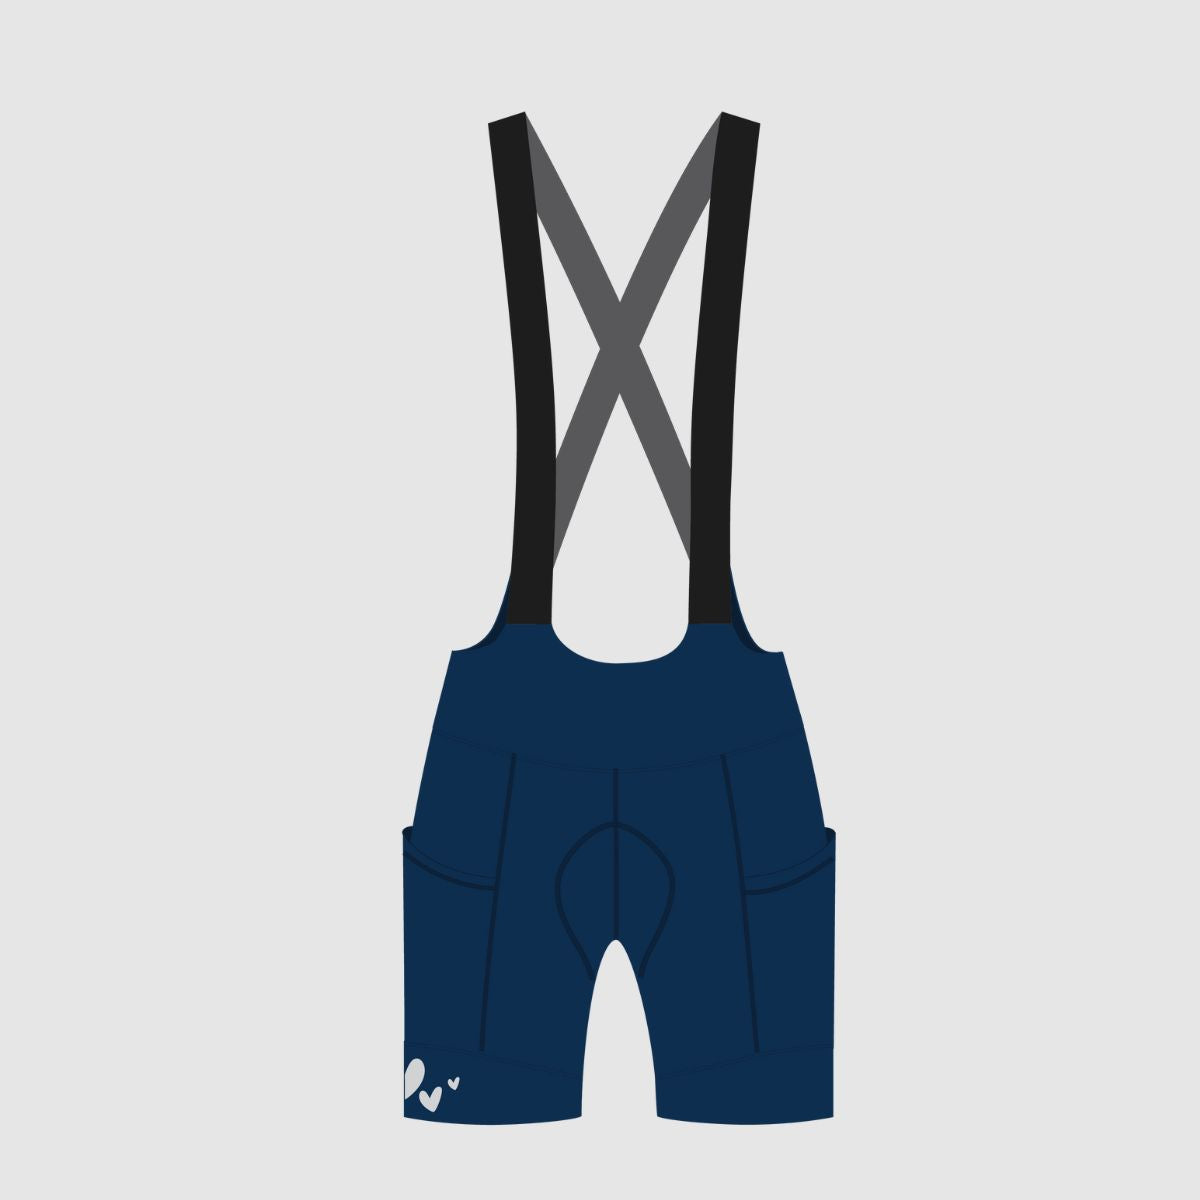 Tech drawing of women's bib shorts with pockets in a blue colour back side